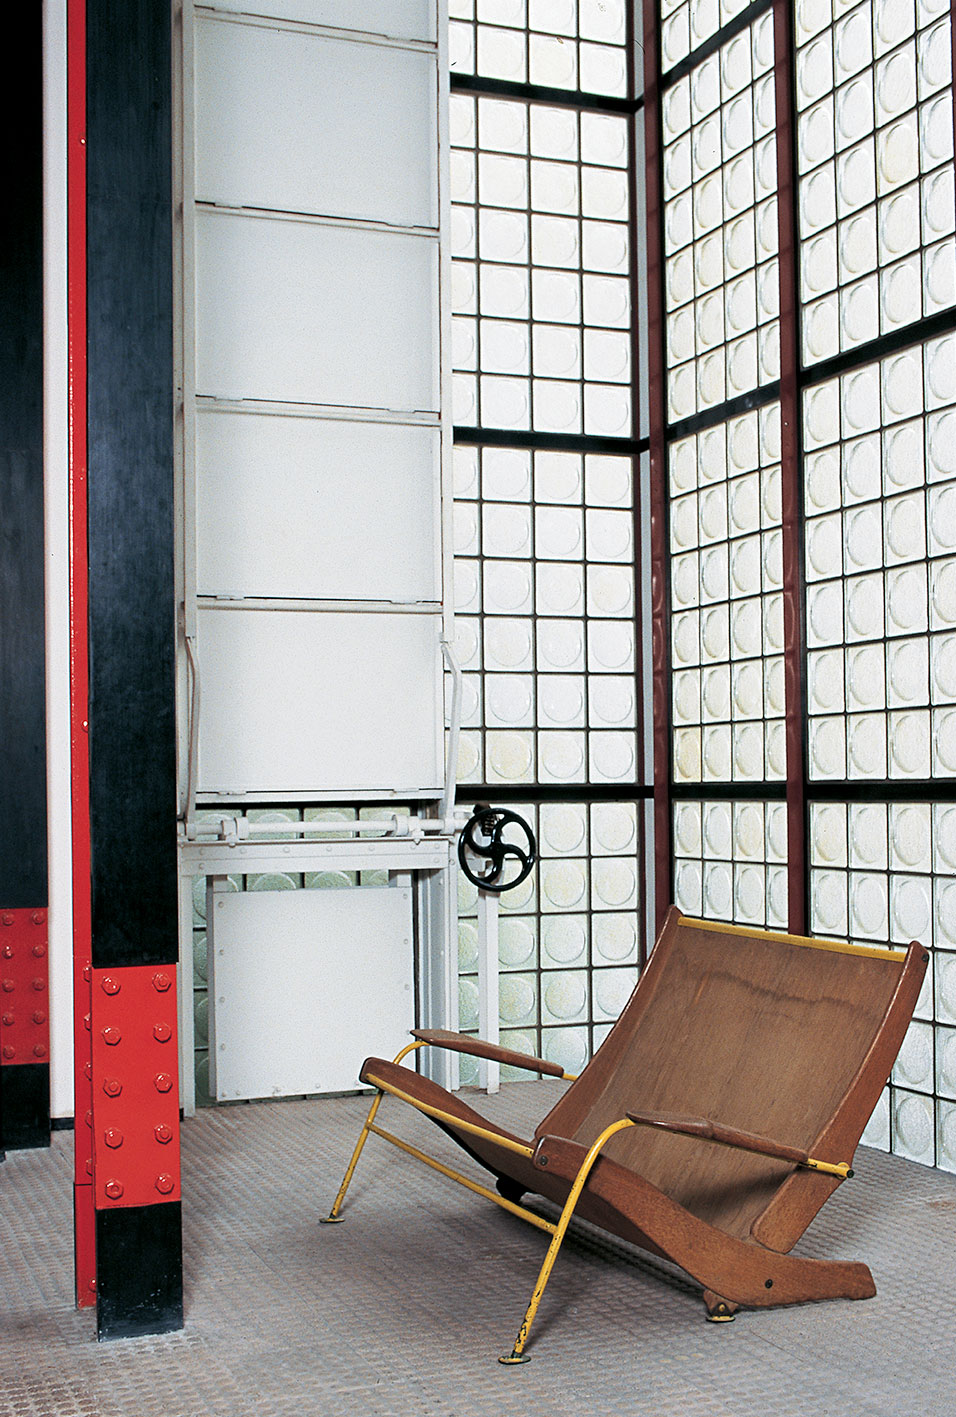 Visiteur Kangourou FV 32 armchair, two-seated variant. View from the exhibition organized in 1998 by the Galerie Jousse Seguin and JGM Galerie at the Maison de Verre, Paris (architects P. Chareau and B. Bijvoet, 1928–1931).